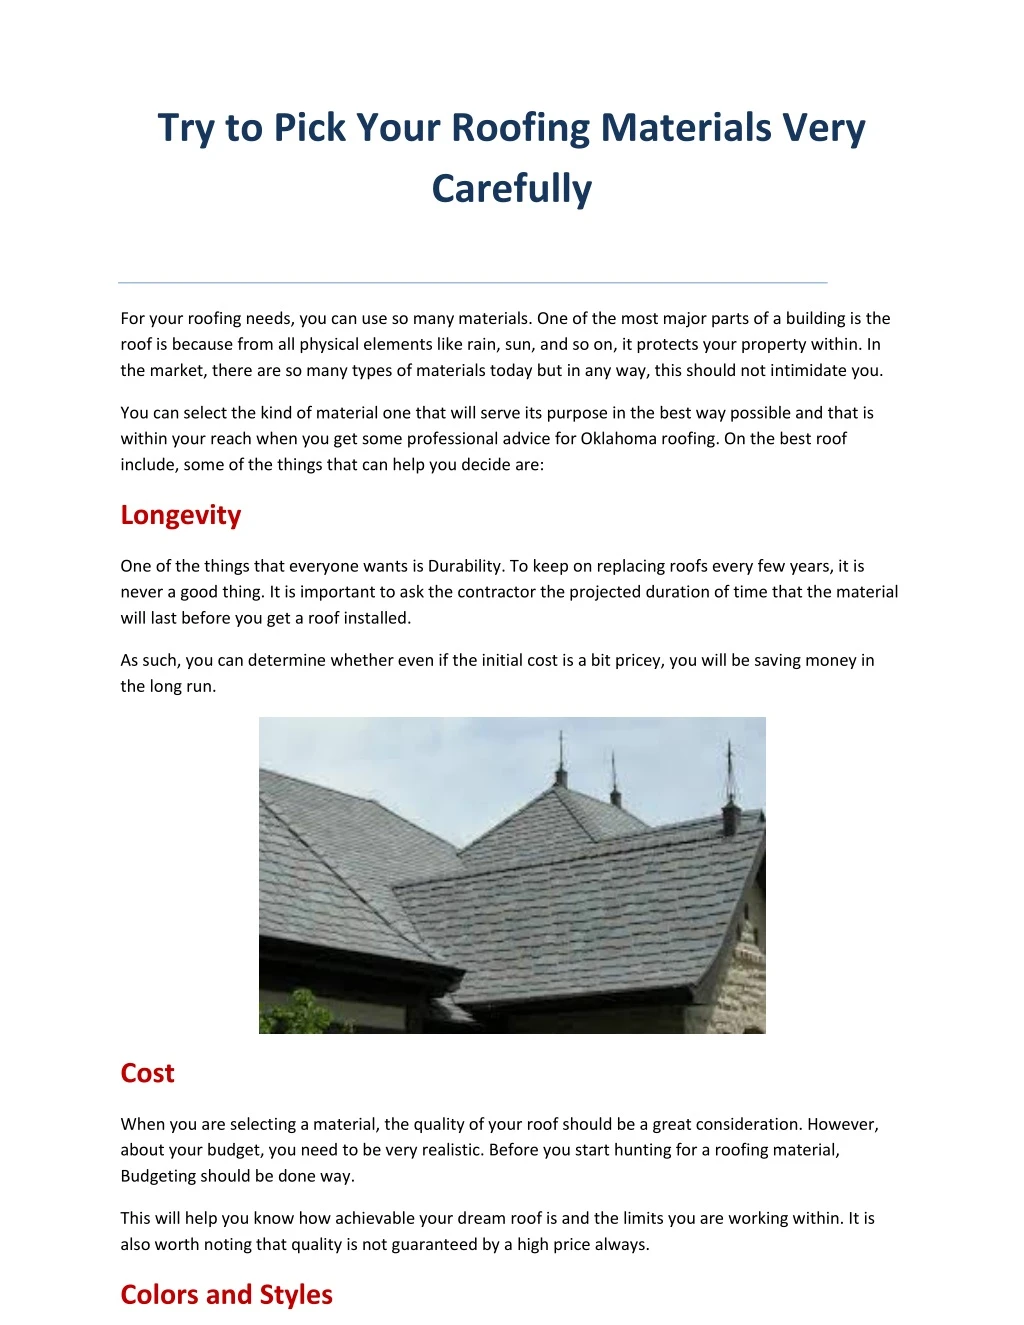 try to pick your roofing materials very carefully